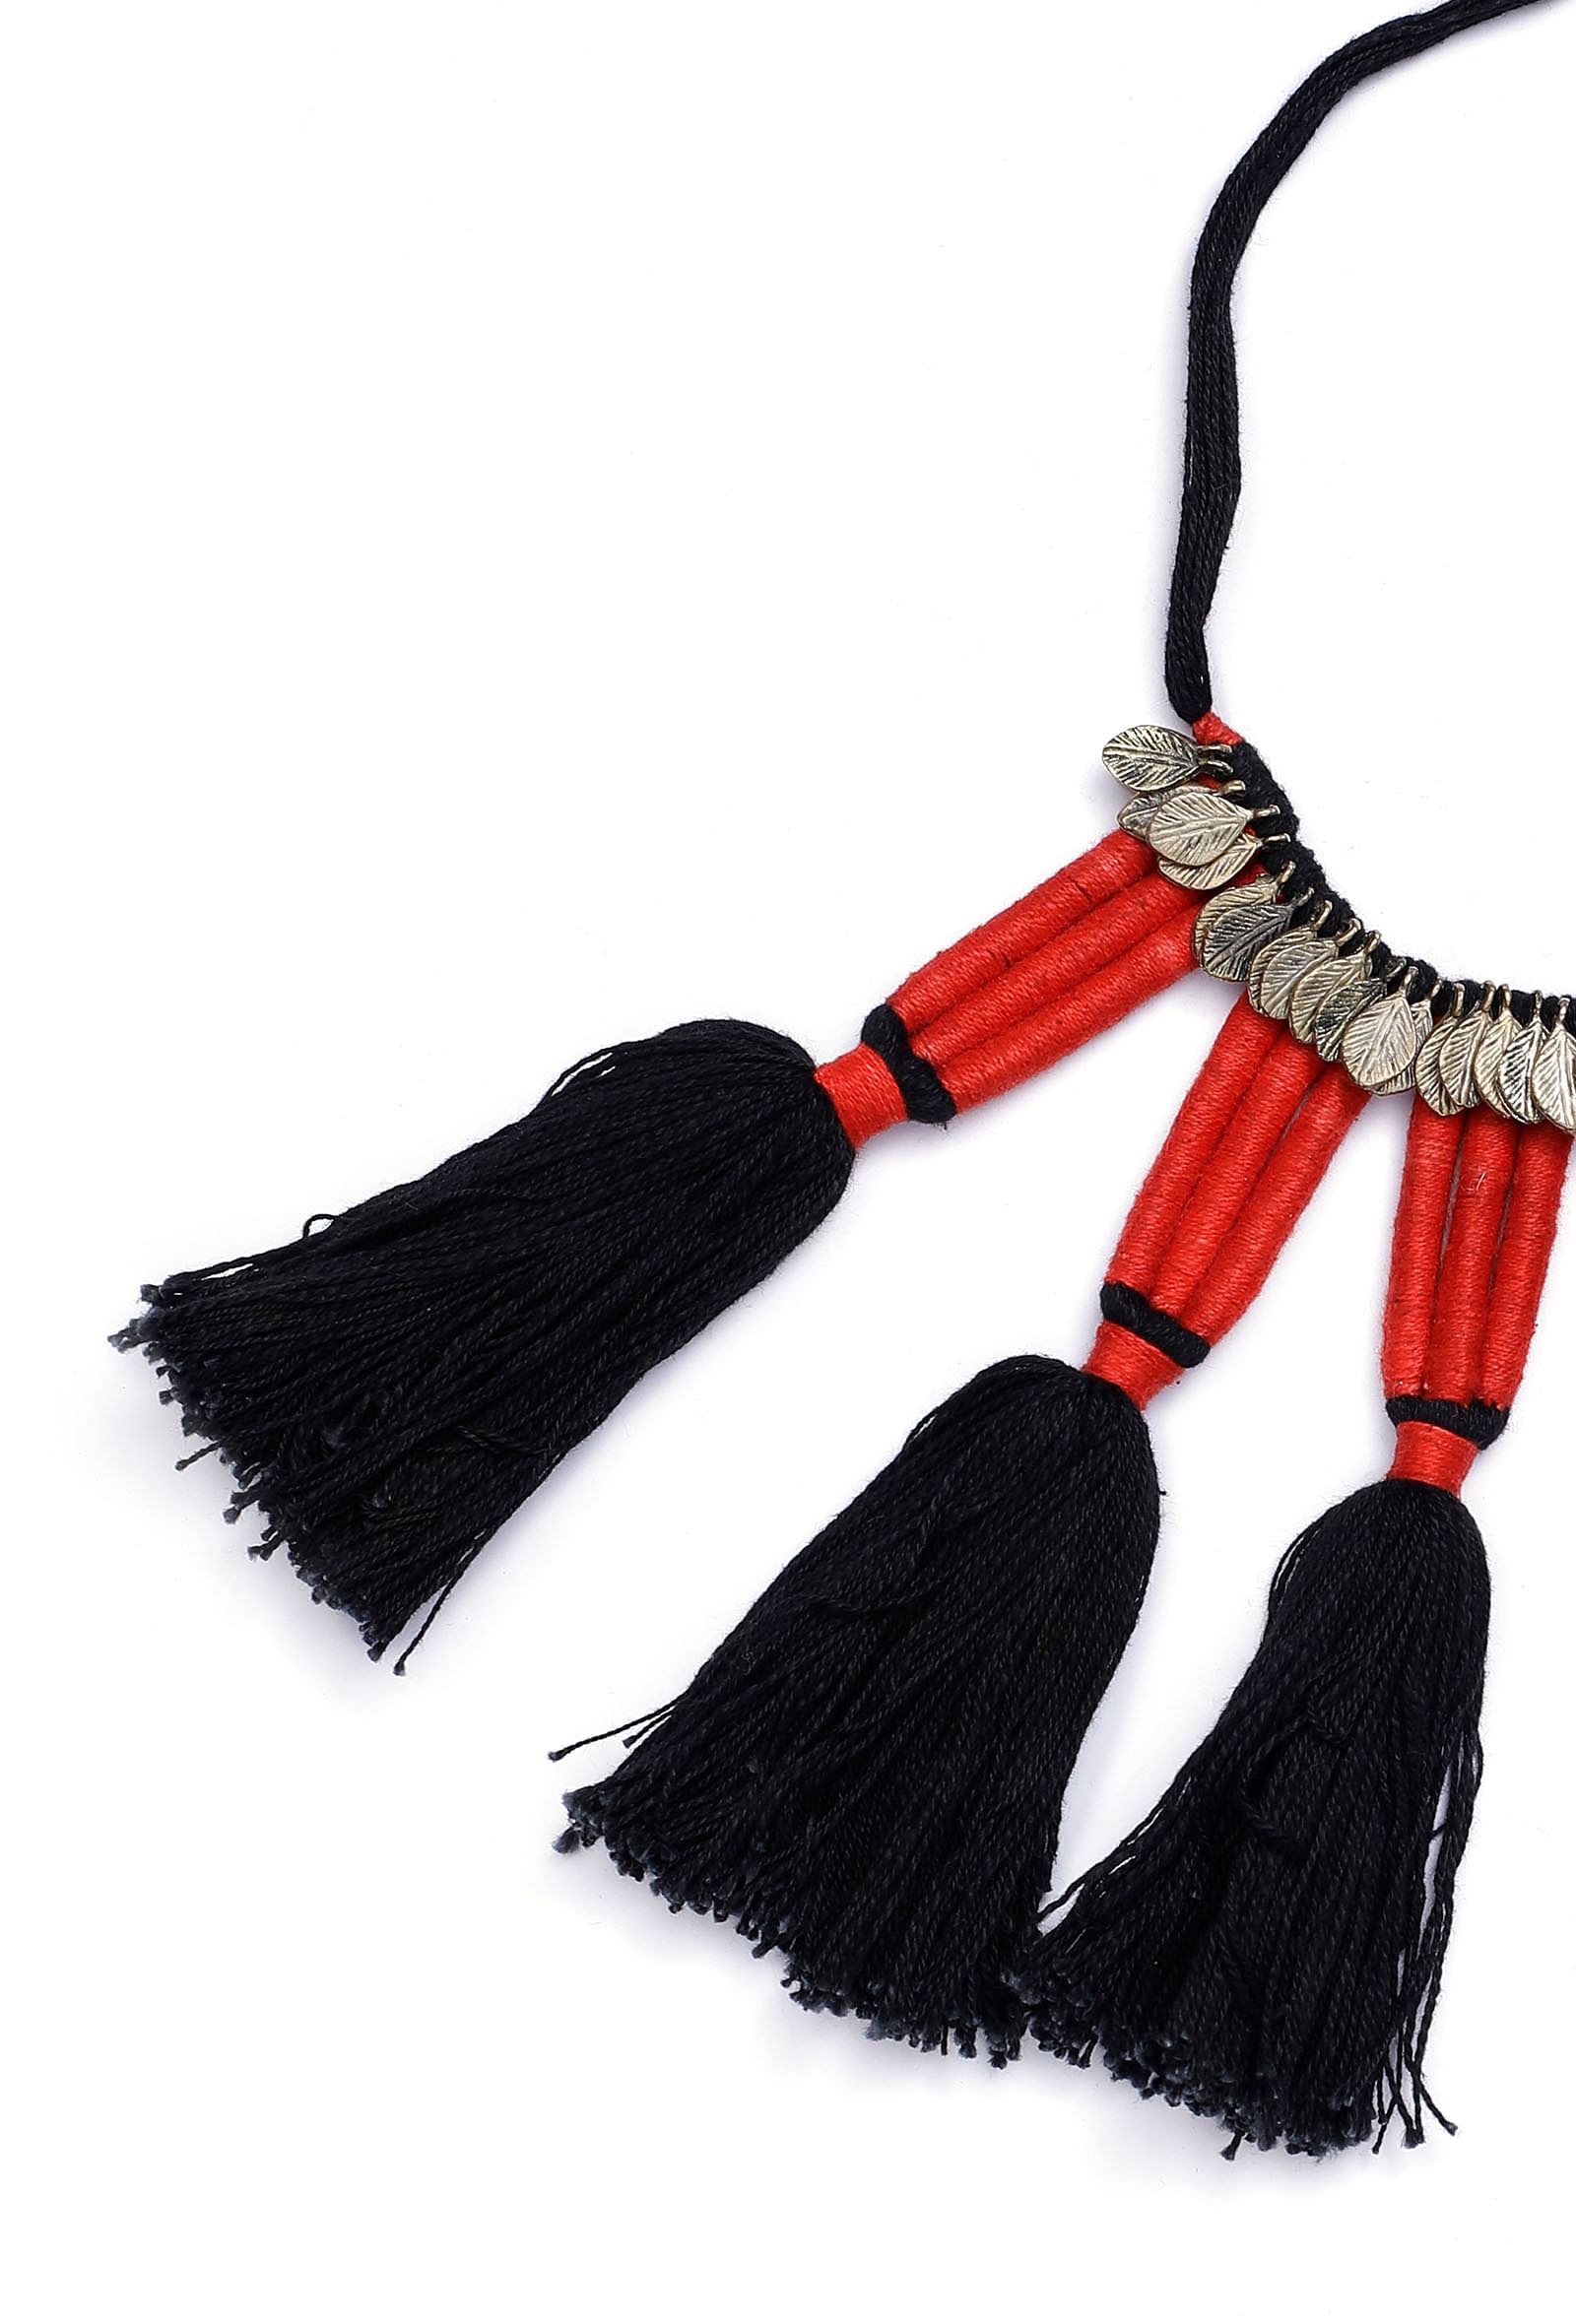 Red and Black Thread Silver Tribal Necklace